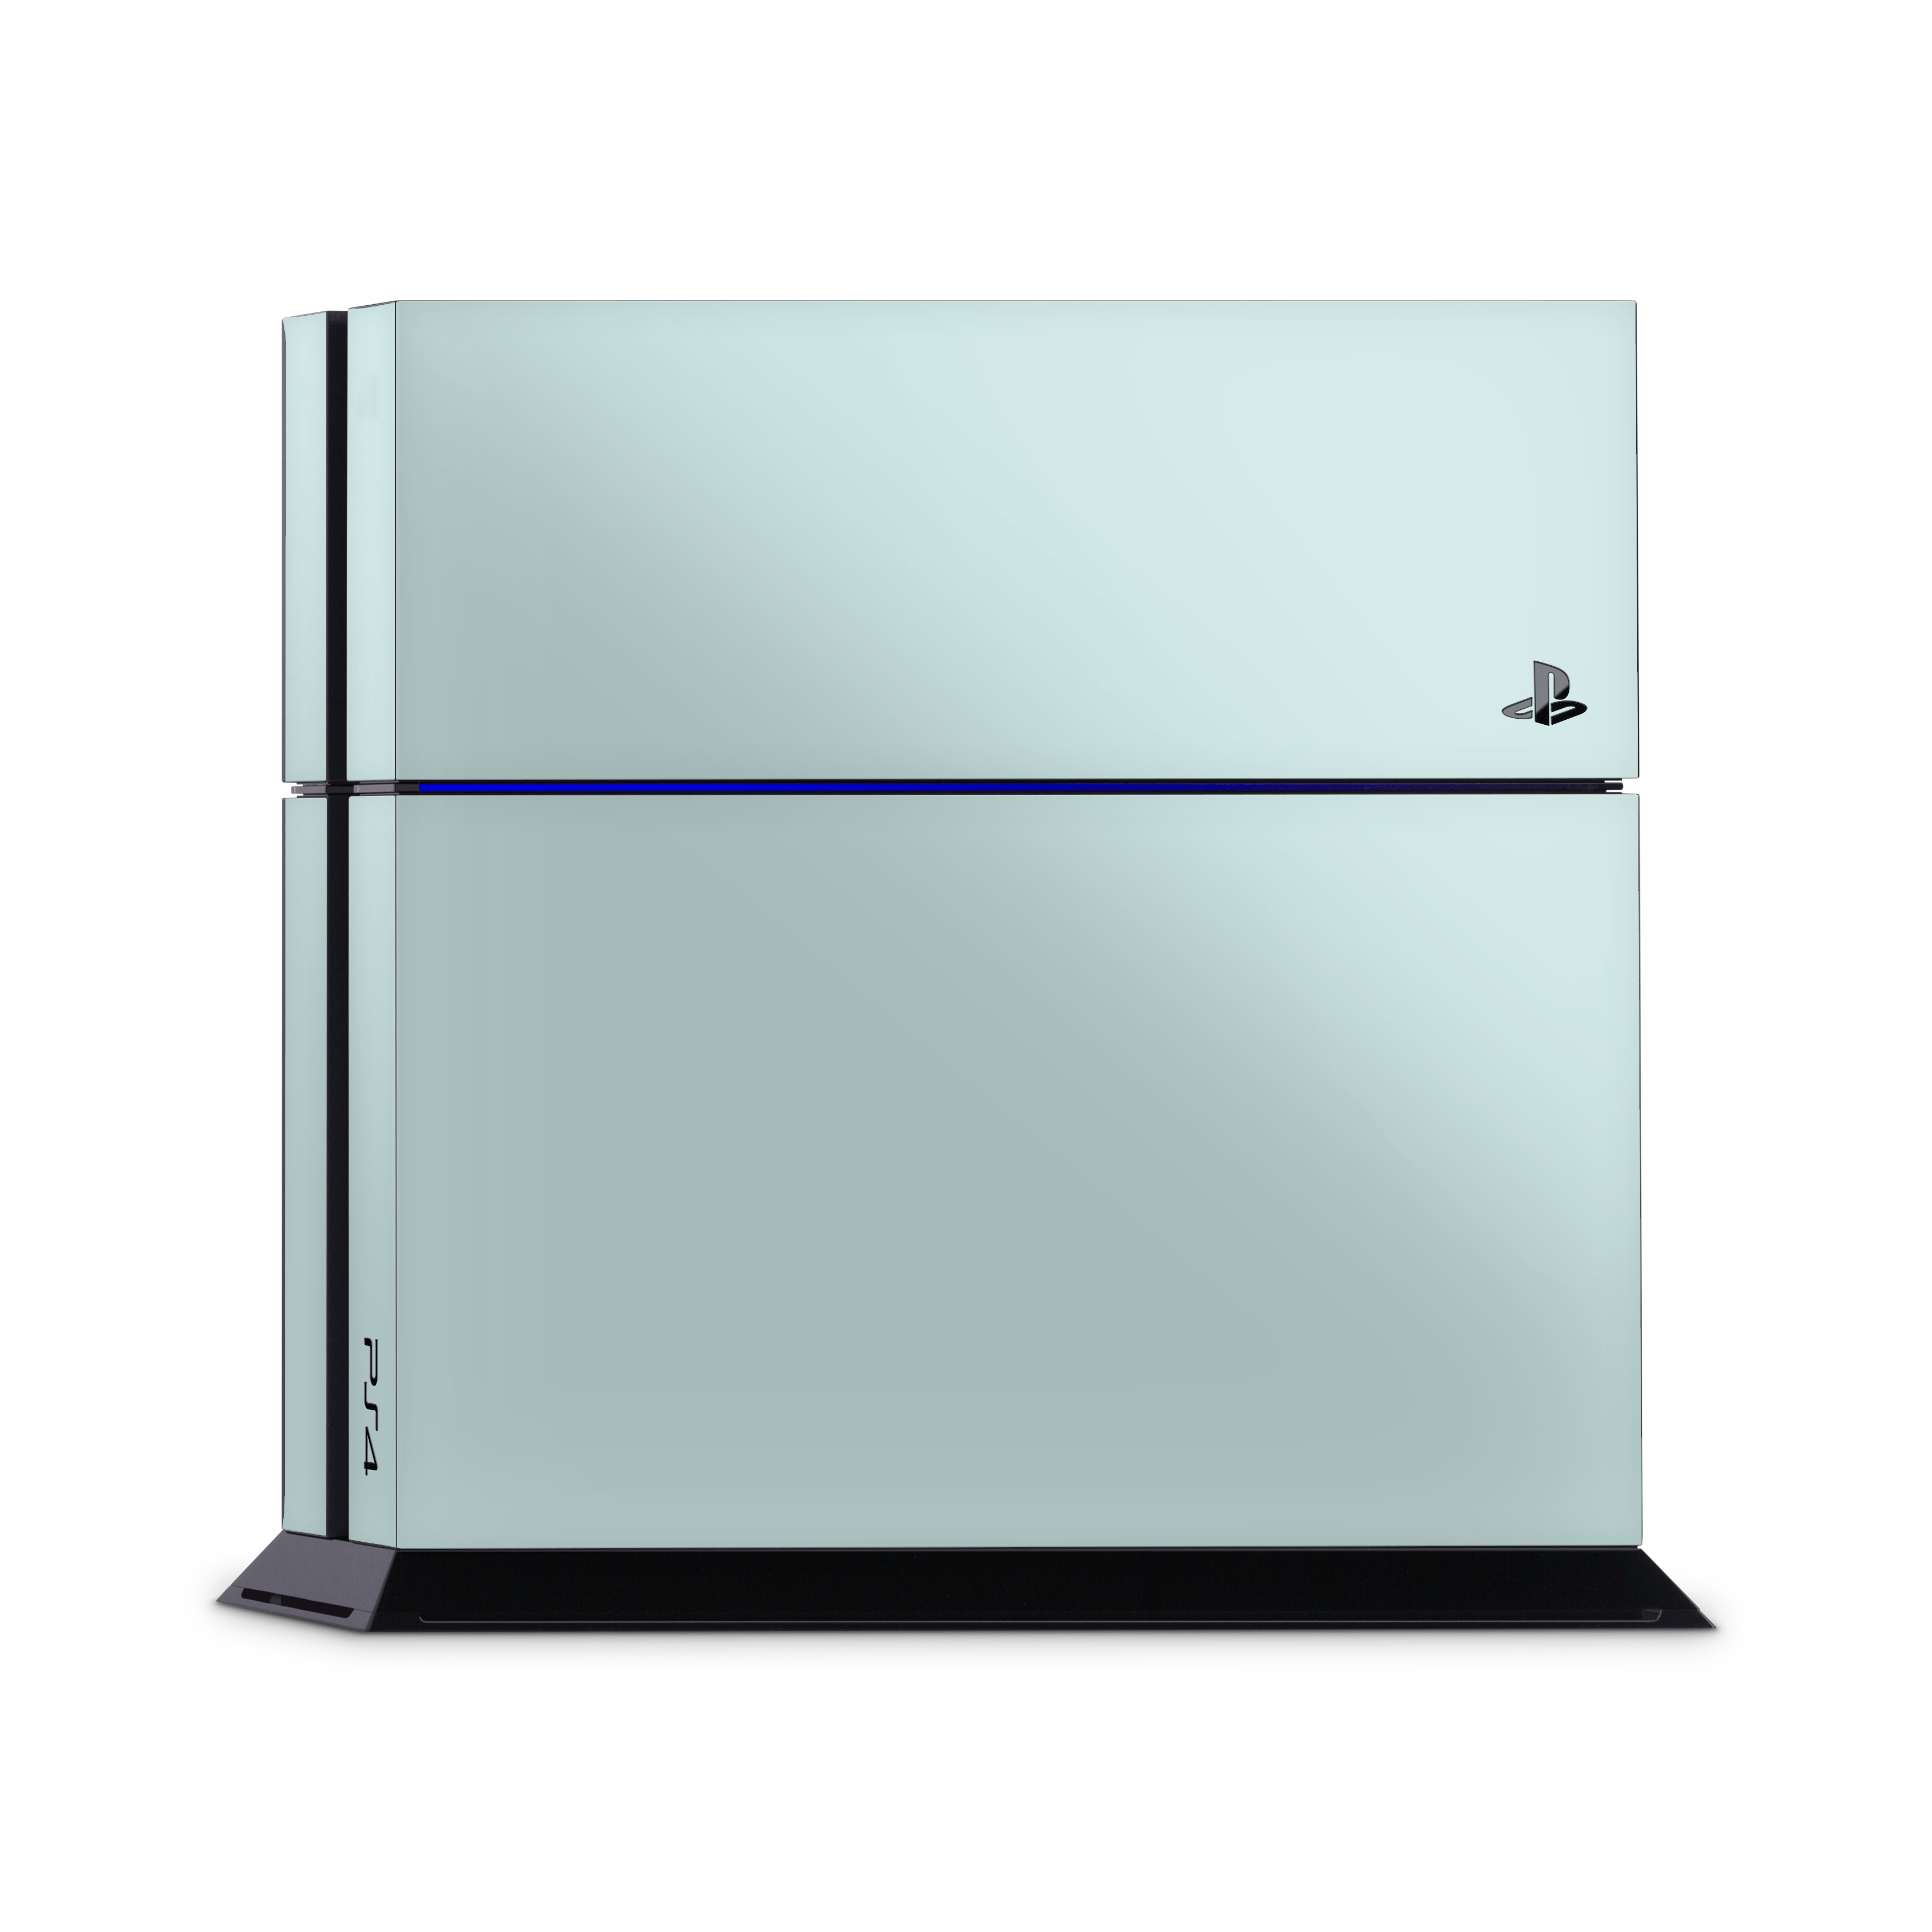 Dusty Blue PS4 | PS4 Pro | PS4 Slim Skins